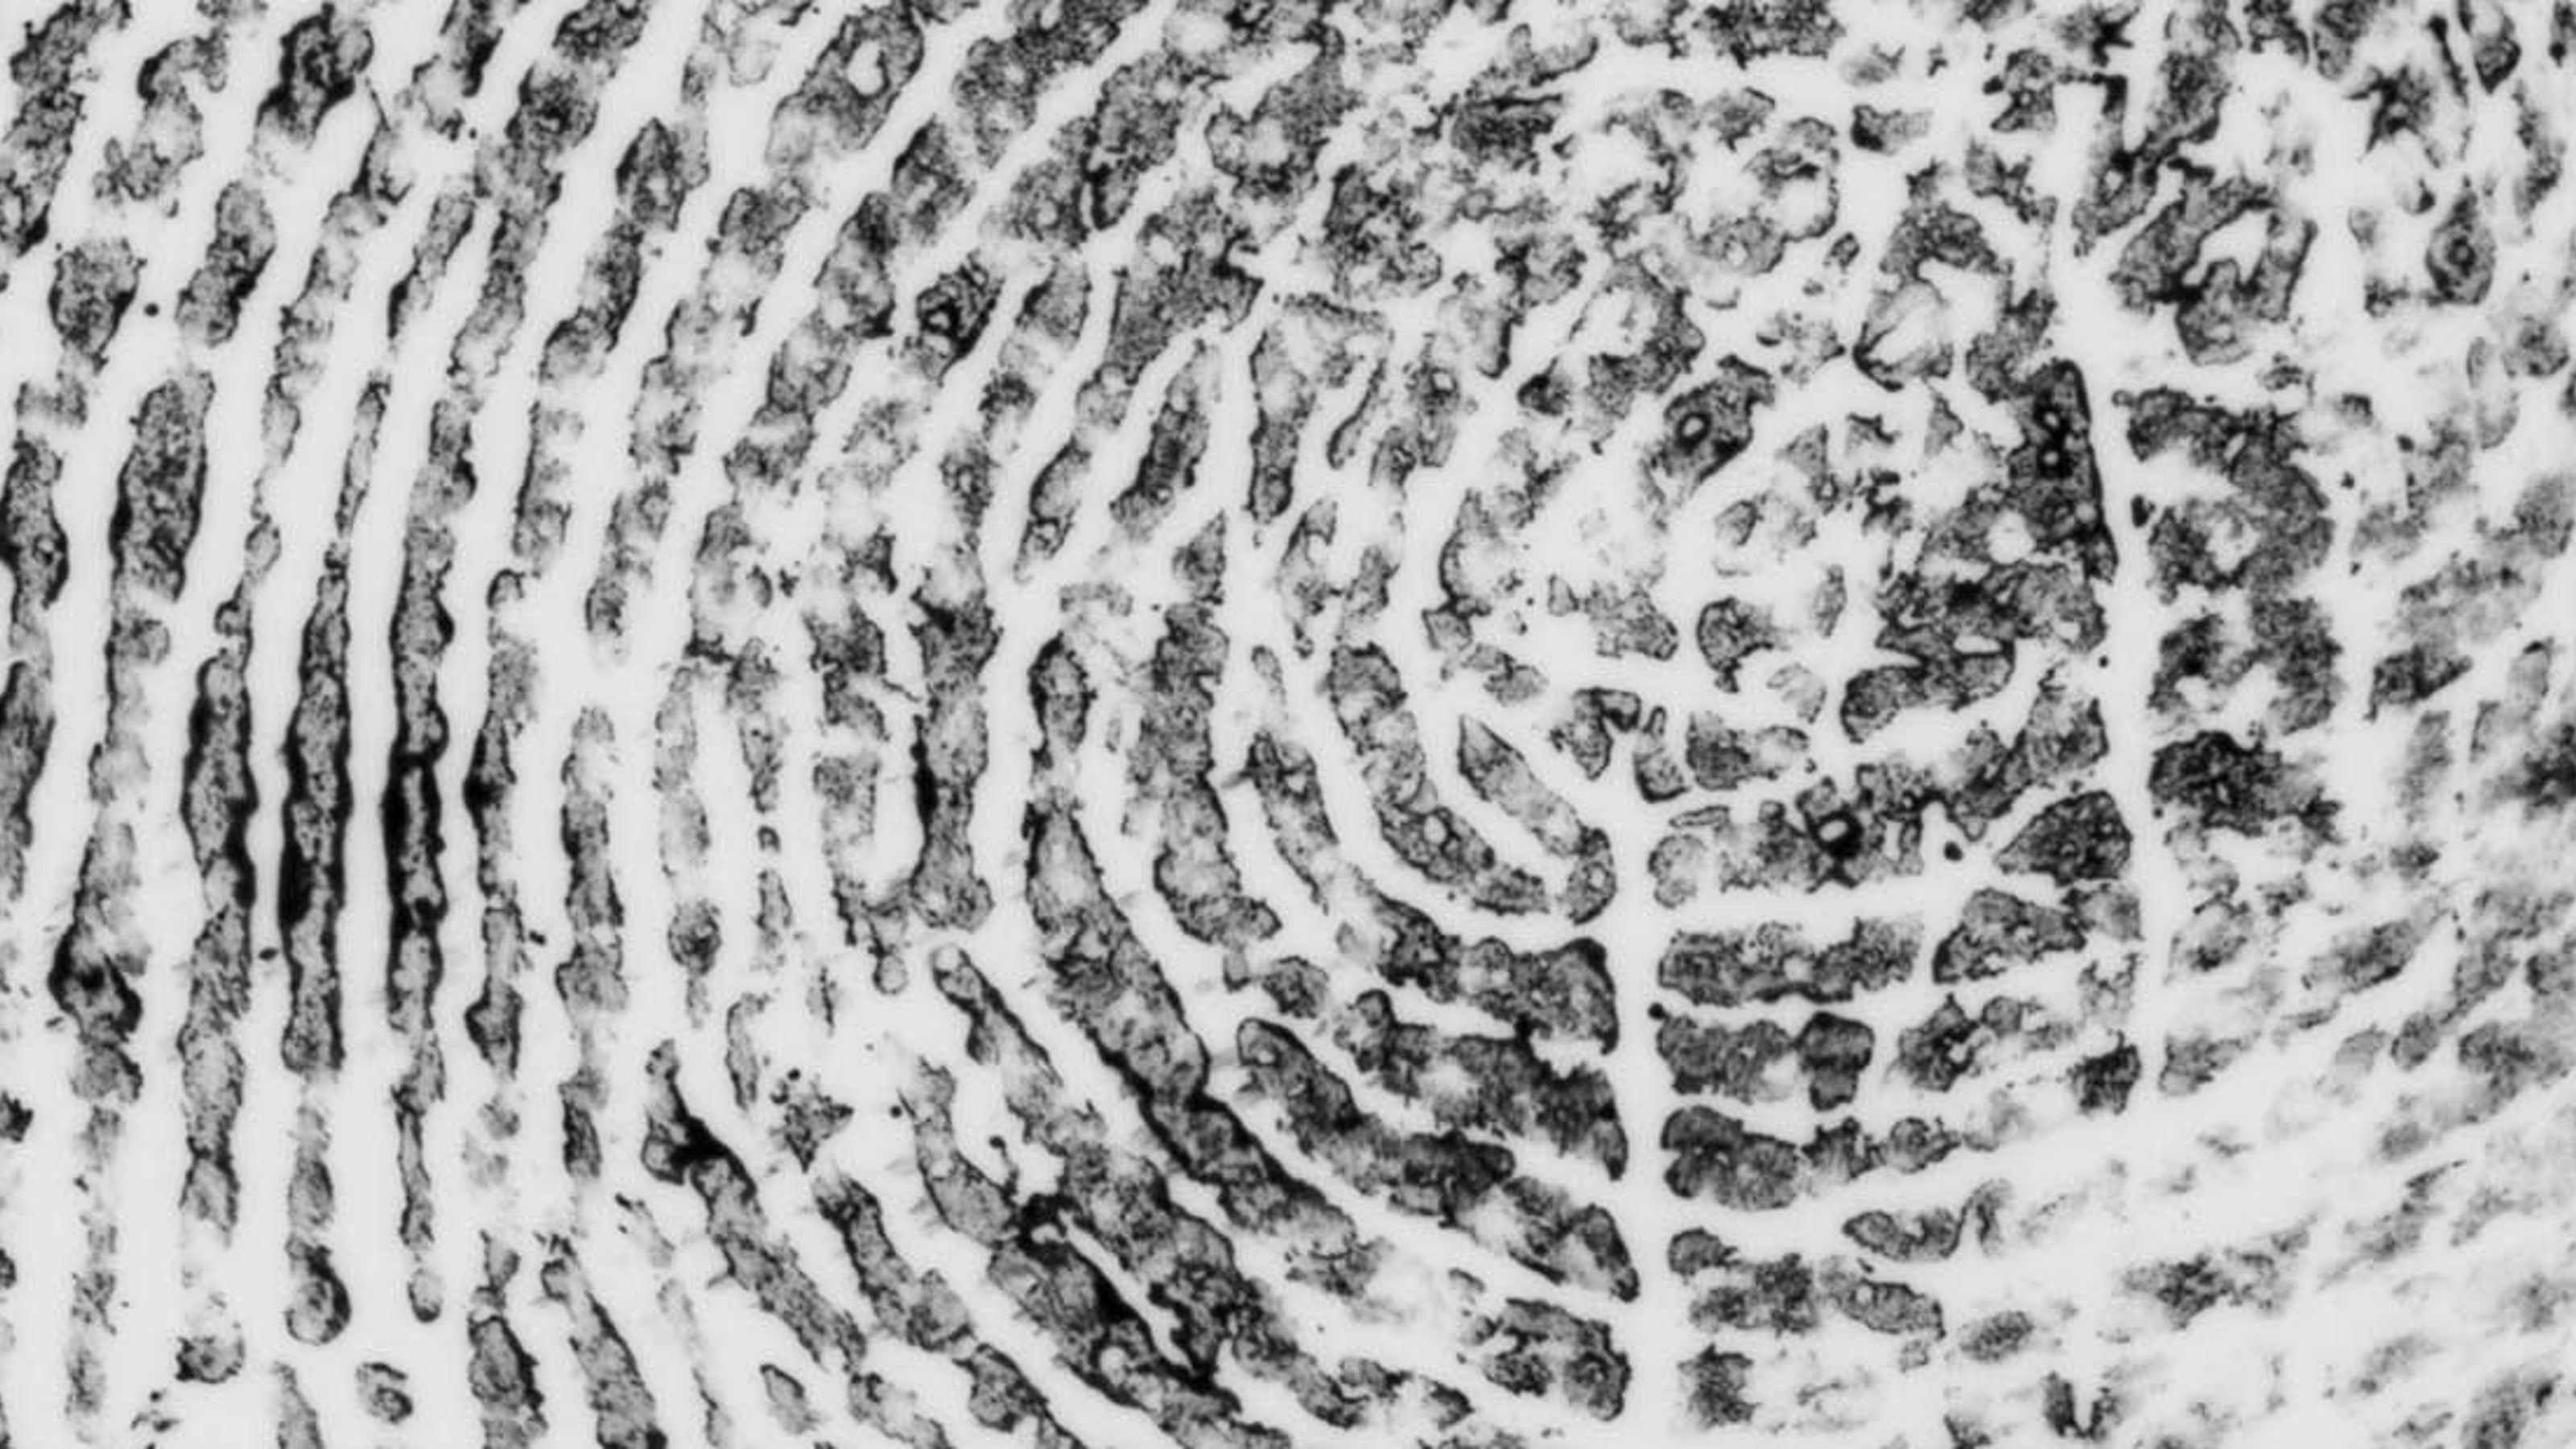 Black and white close-up of a fingerprint